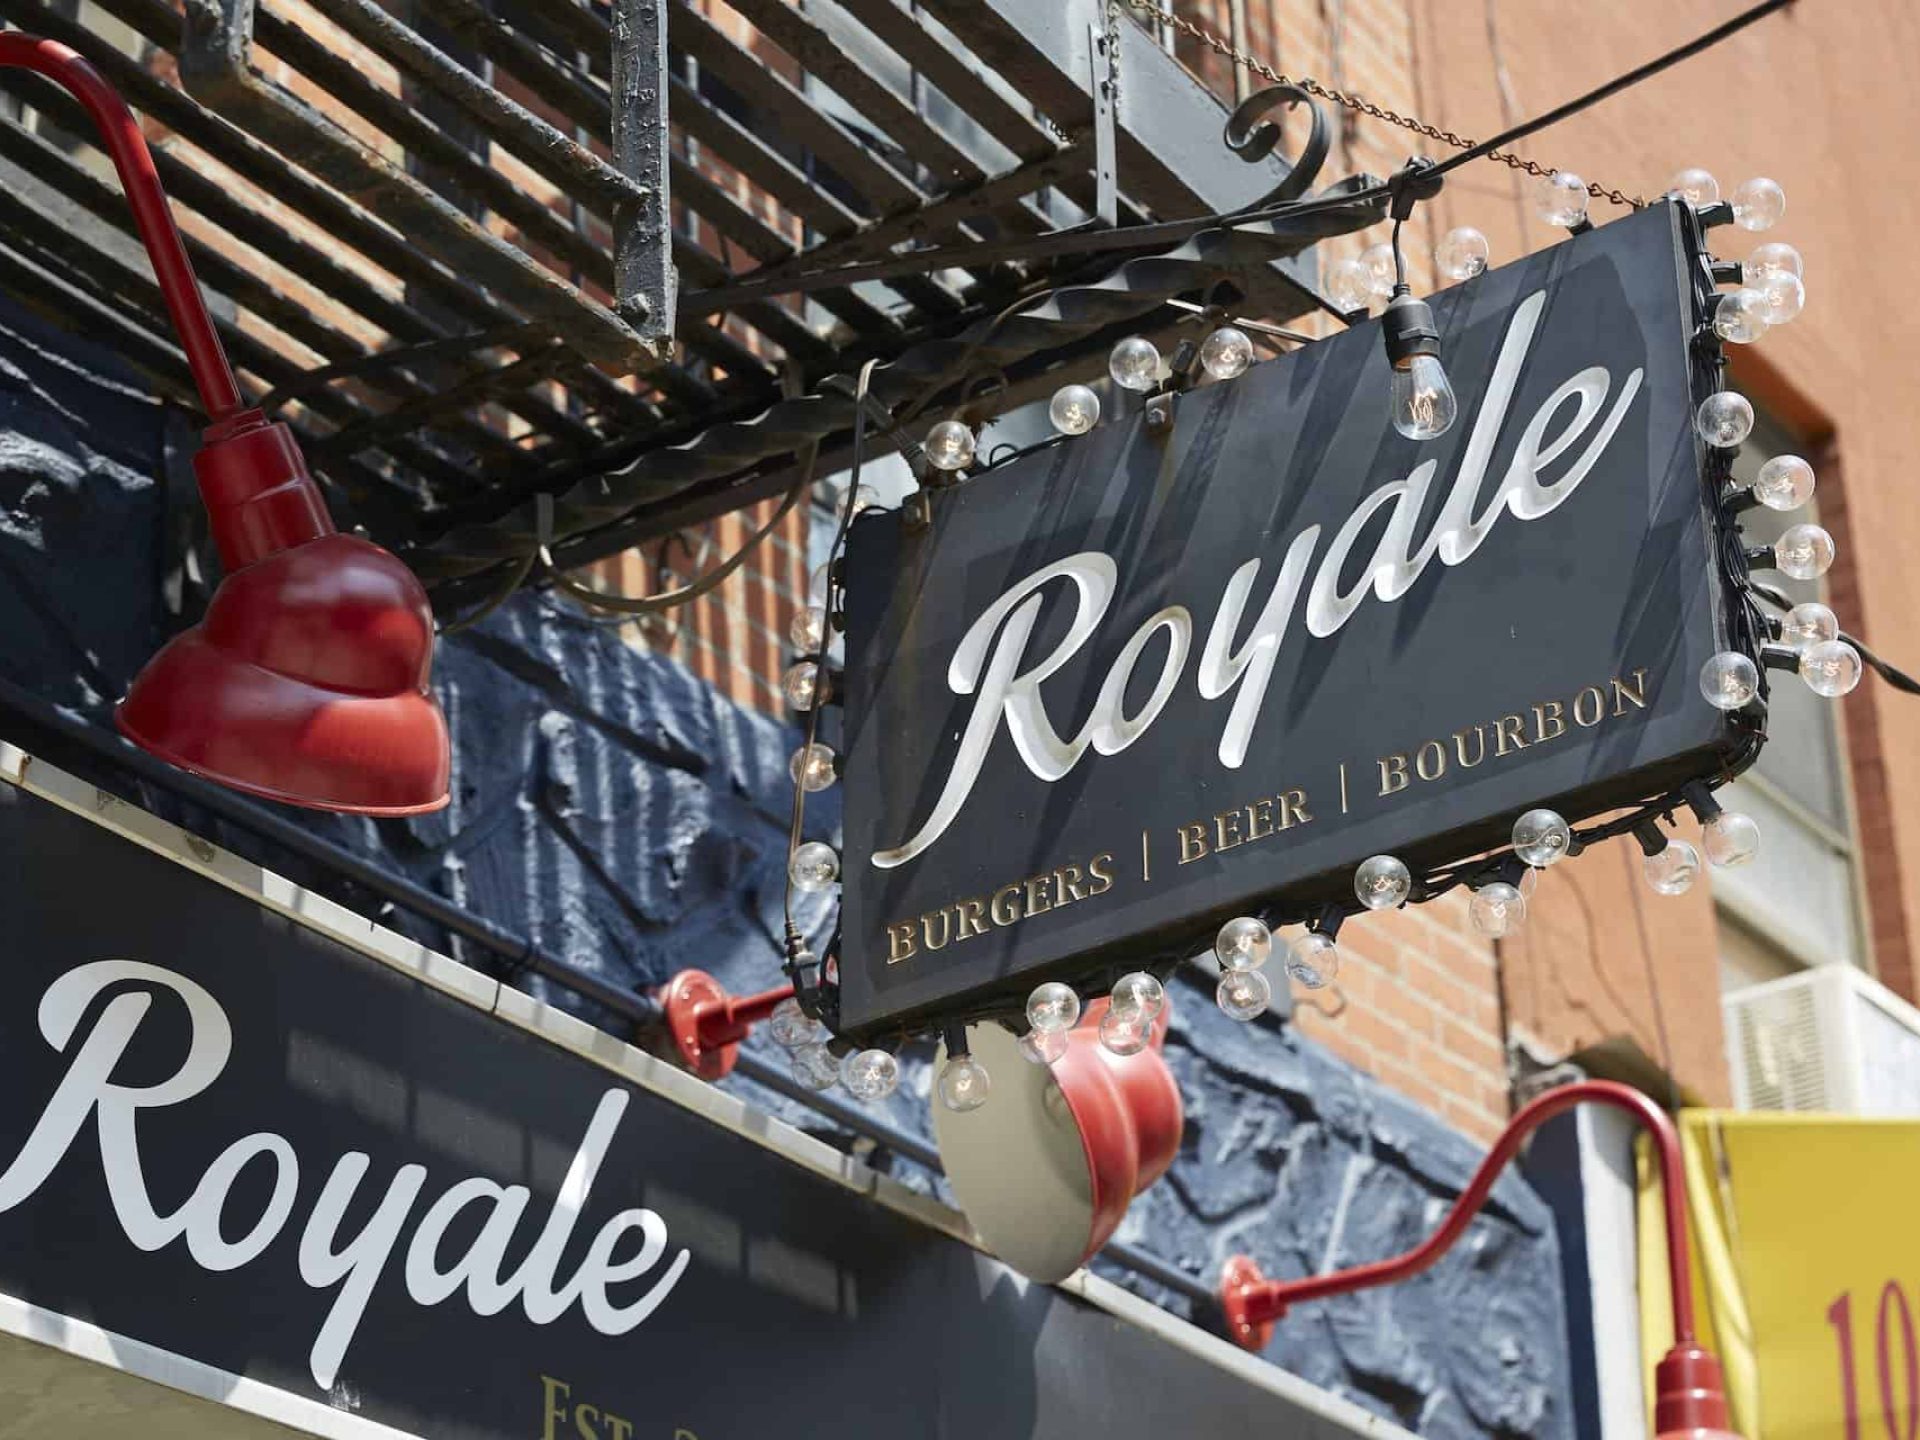 Close up of building sign for Royale burger restaurant in New York's East Village. Black sign with white & yellow lettering.